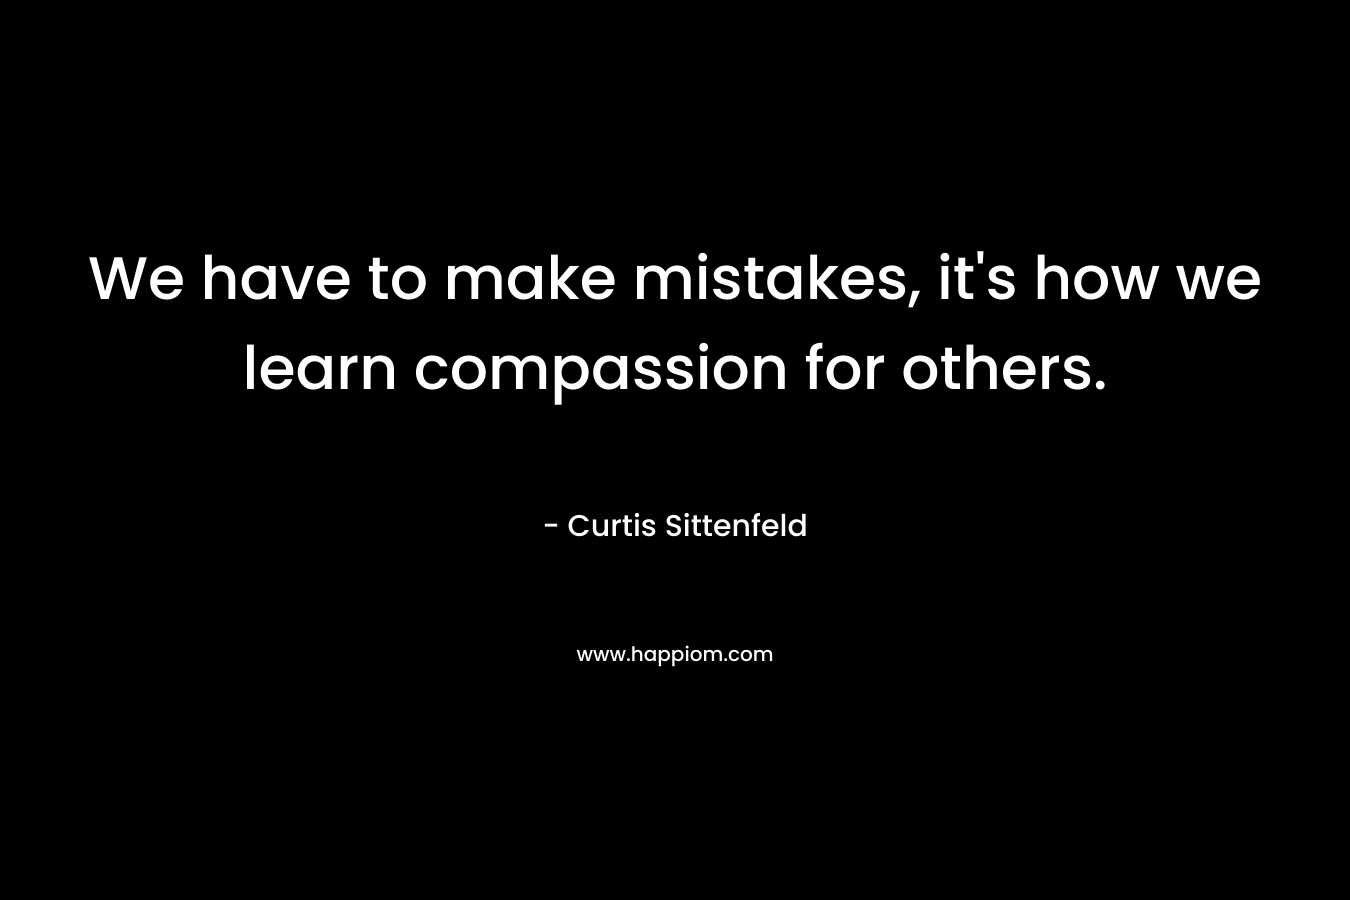 We have to make mistakes, it's how we learn compassion for others.